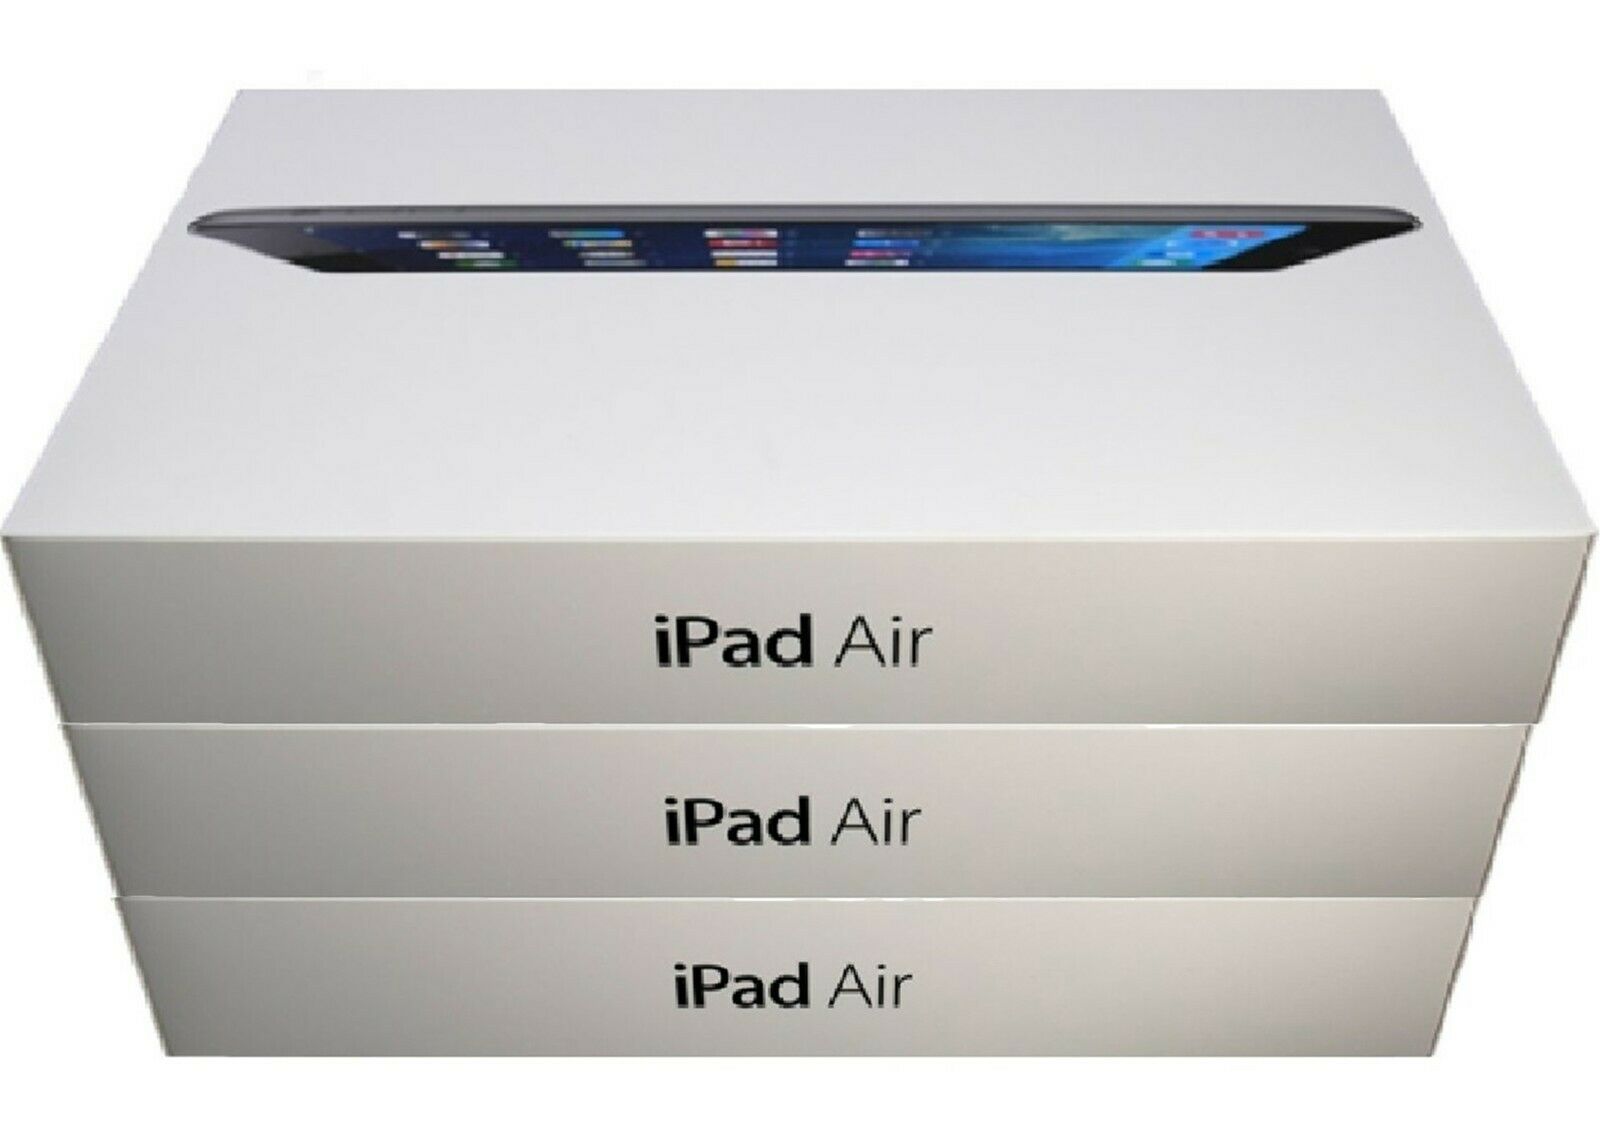 Apple iPad Air - 9.7-inch, Space Gray, 32GB, Wi-Fi Only, Exclusive Bundle Deal